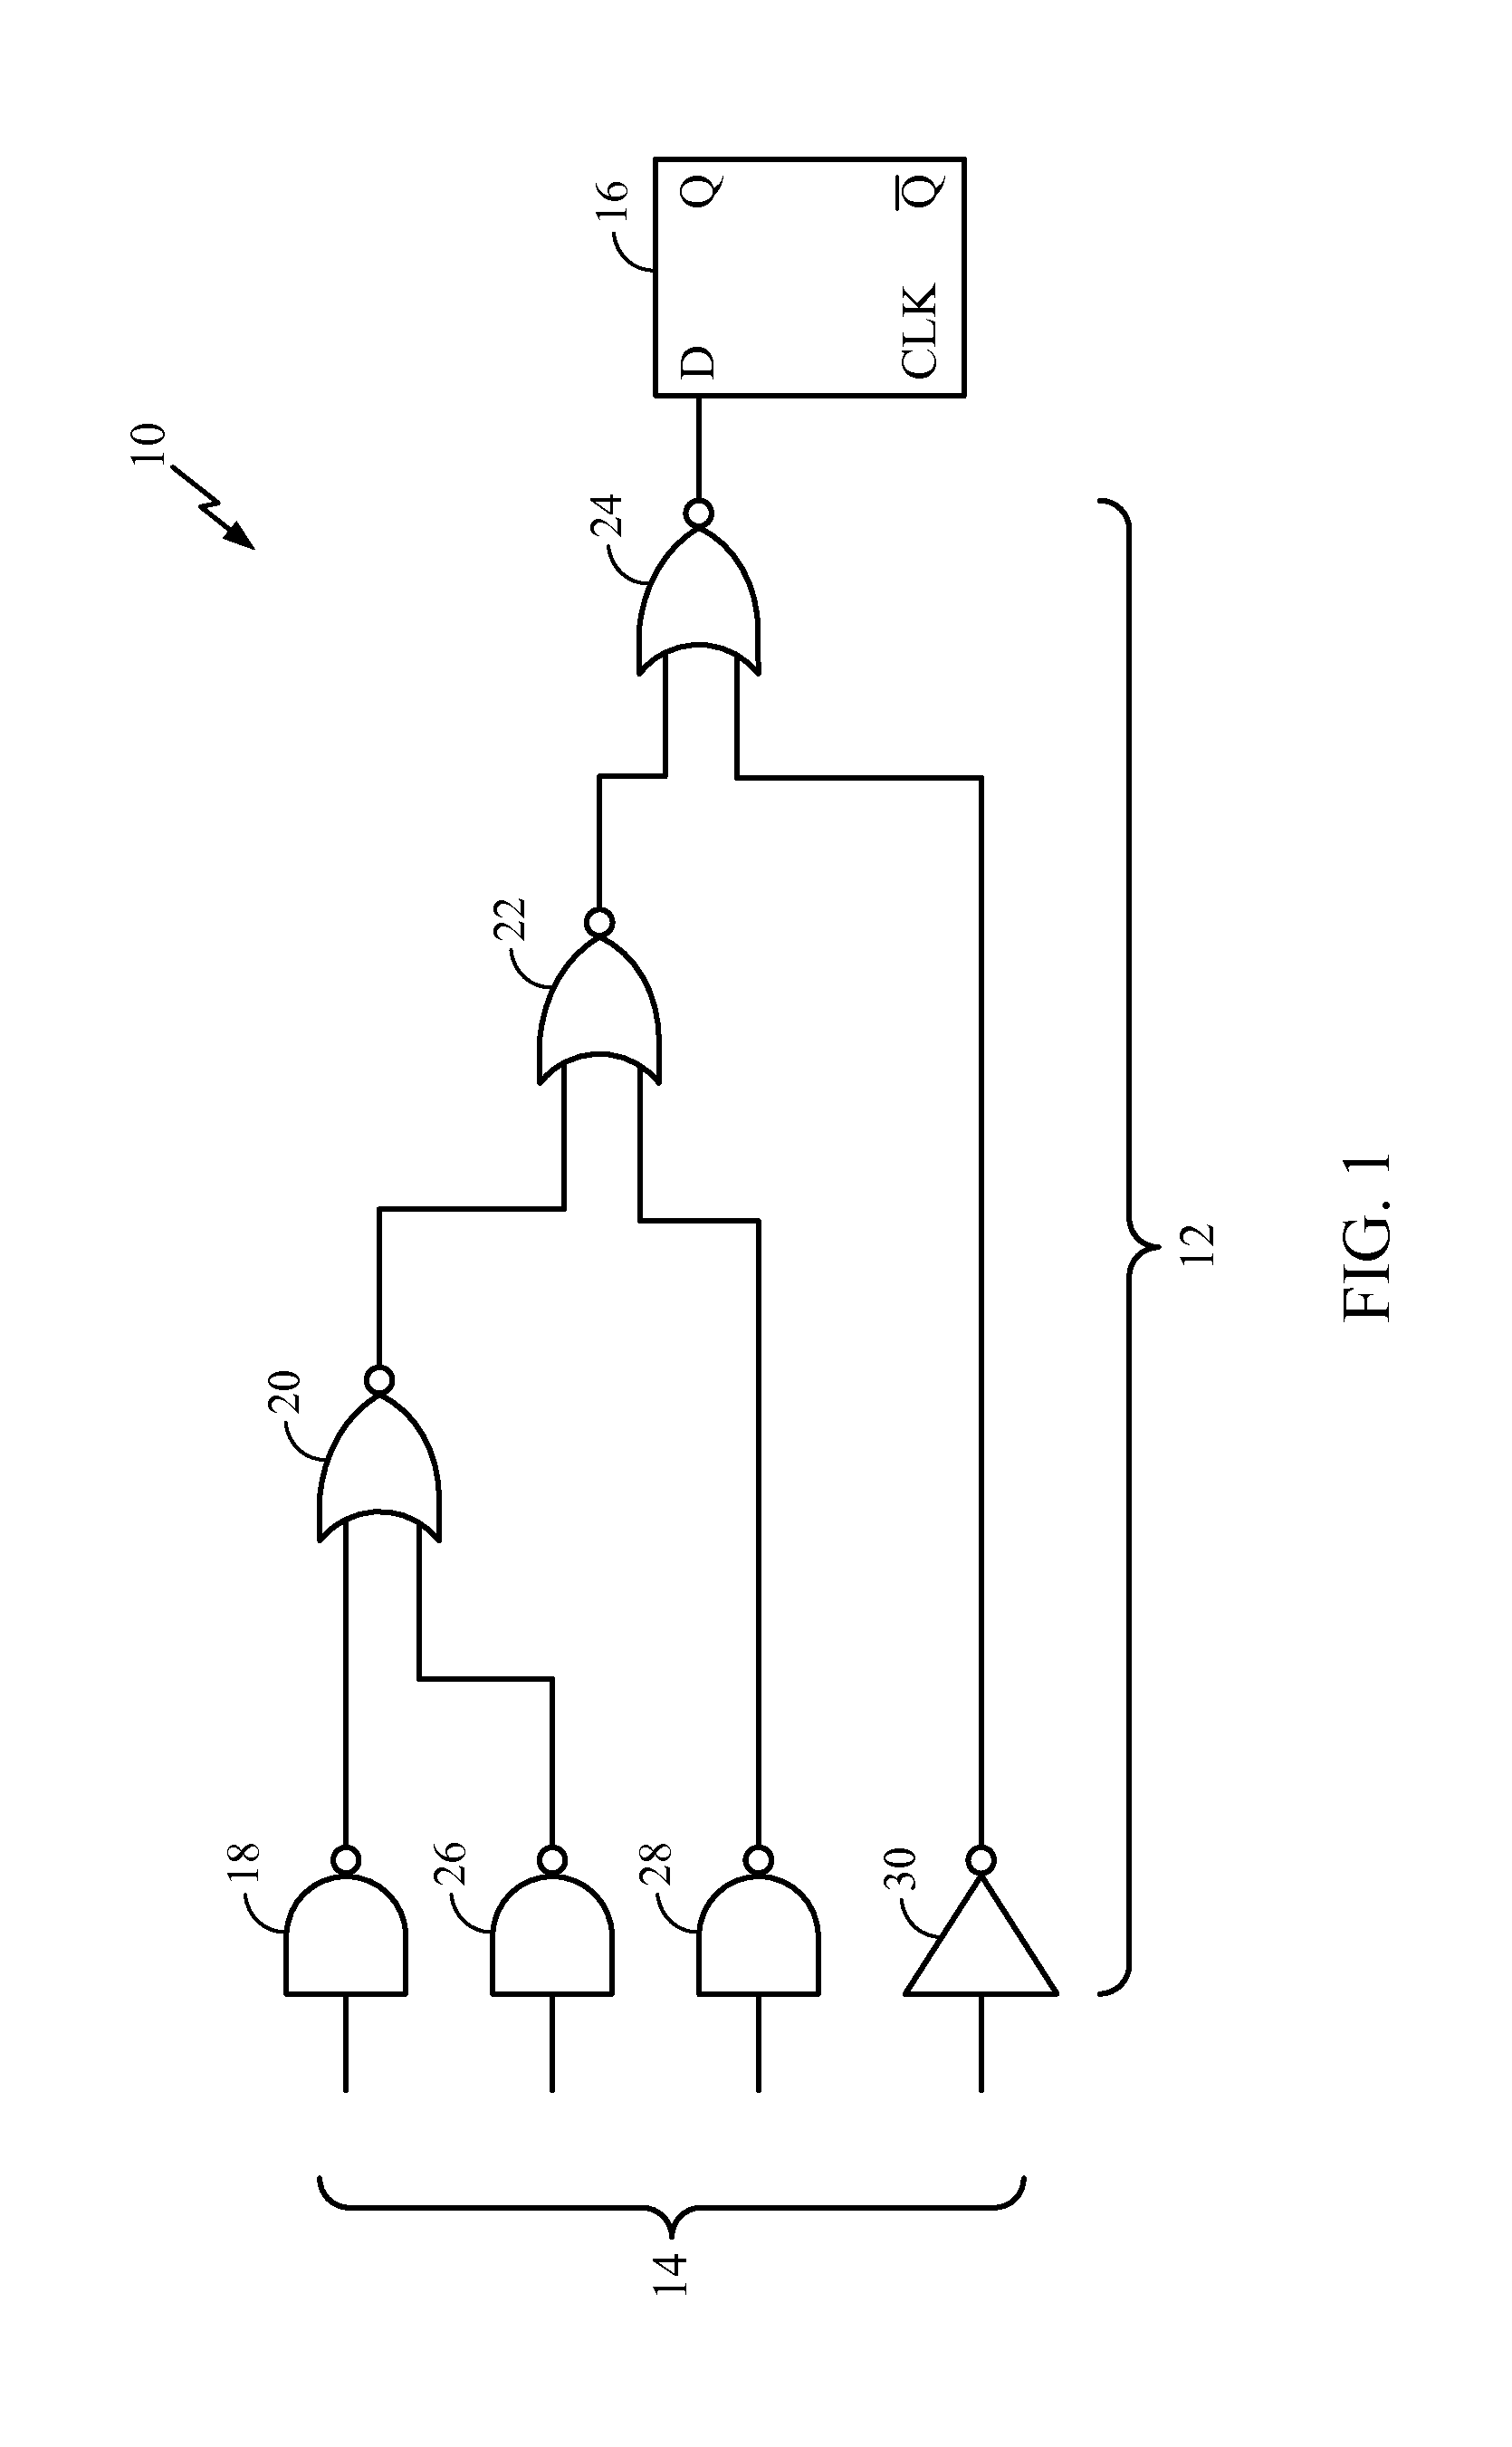 Methods and Circuits for Optimizing Performance and Power Consumption in a Design and Circuit Employing Lower Threshold Voltage (LVT) Devices